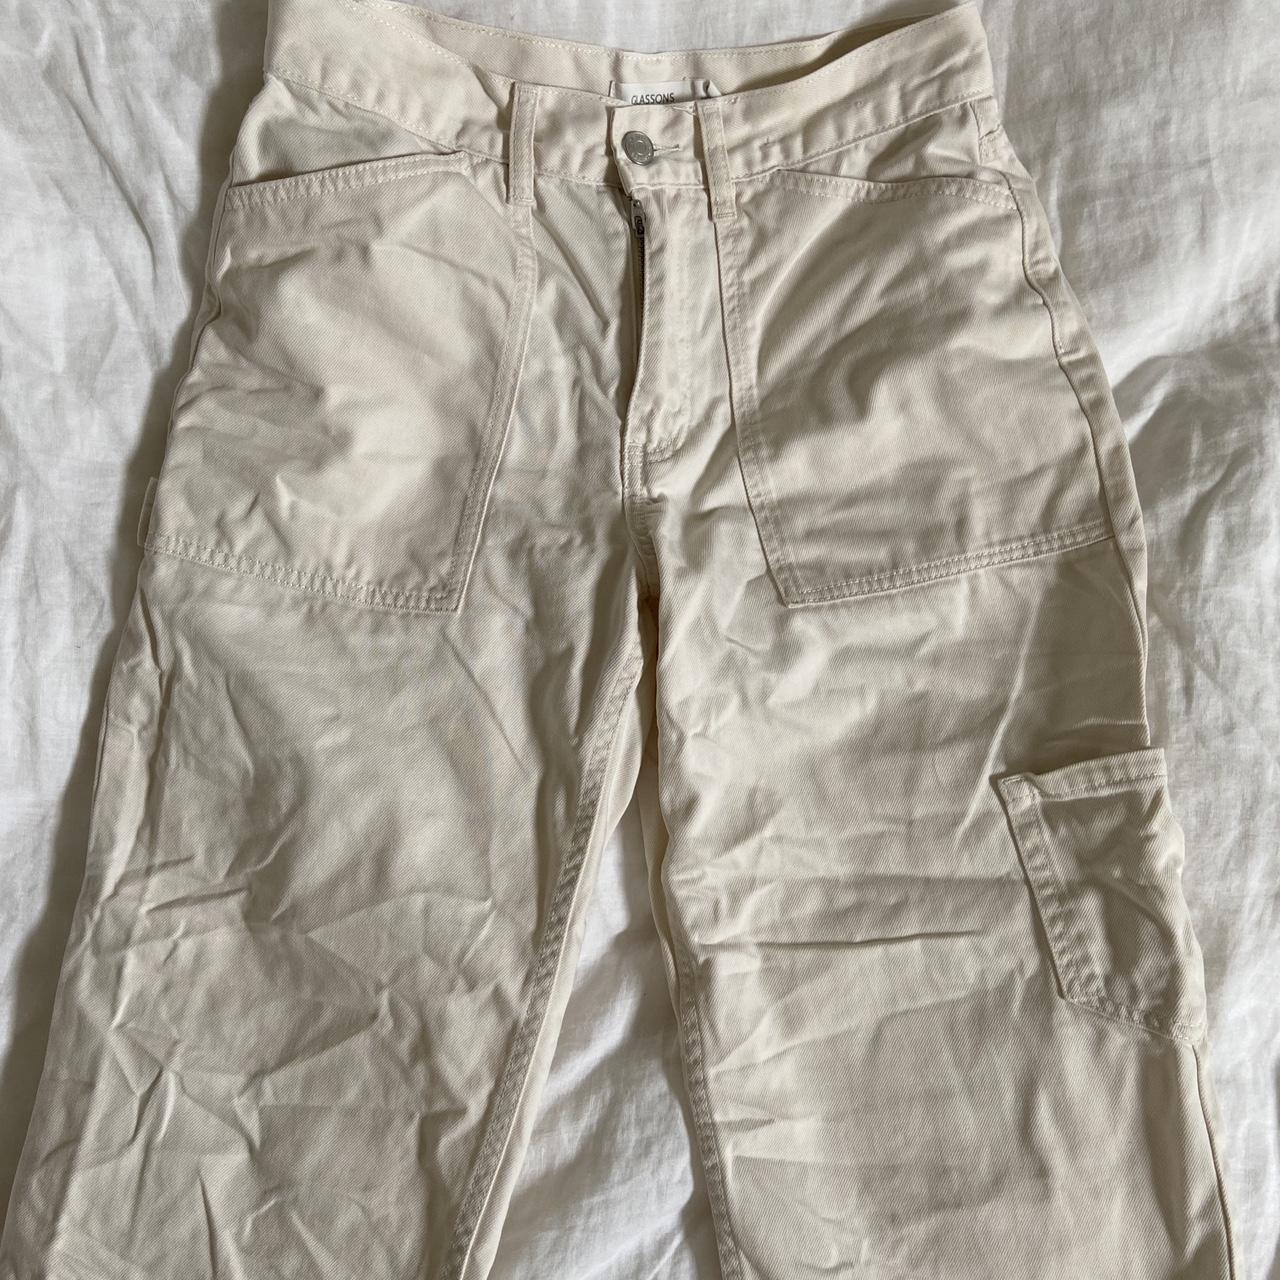 glassons recycled mid rise puddle jeans 🥯 in great... - Depop